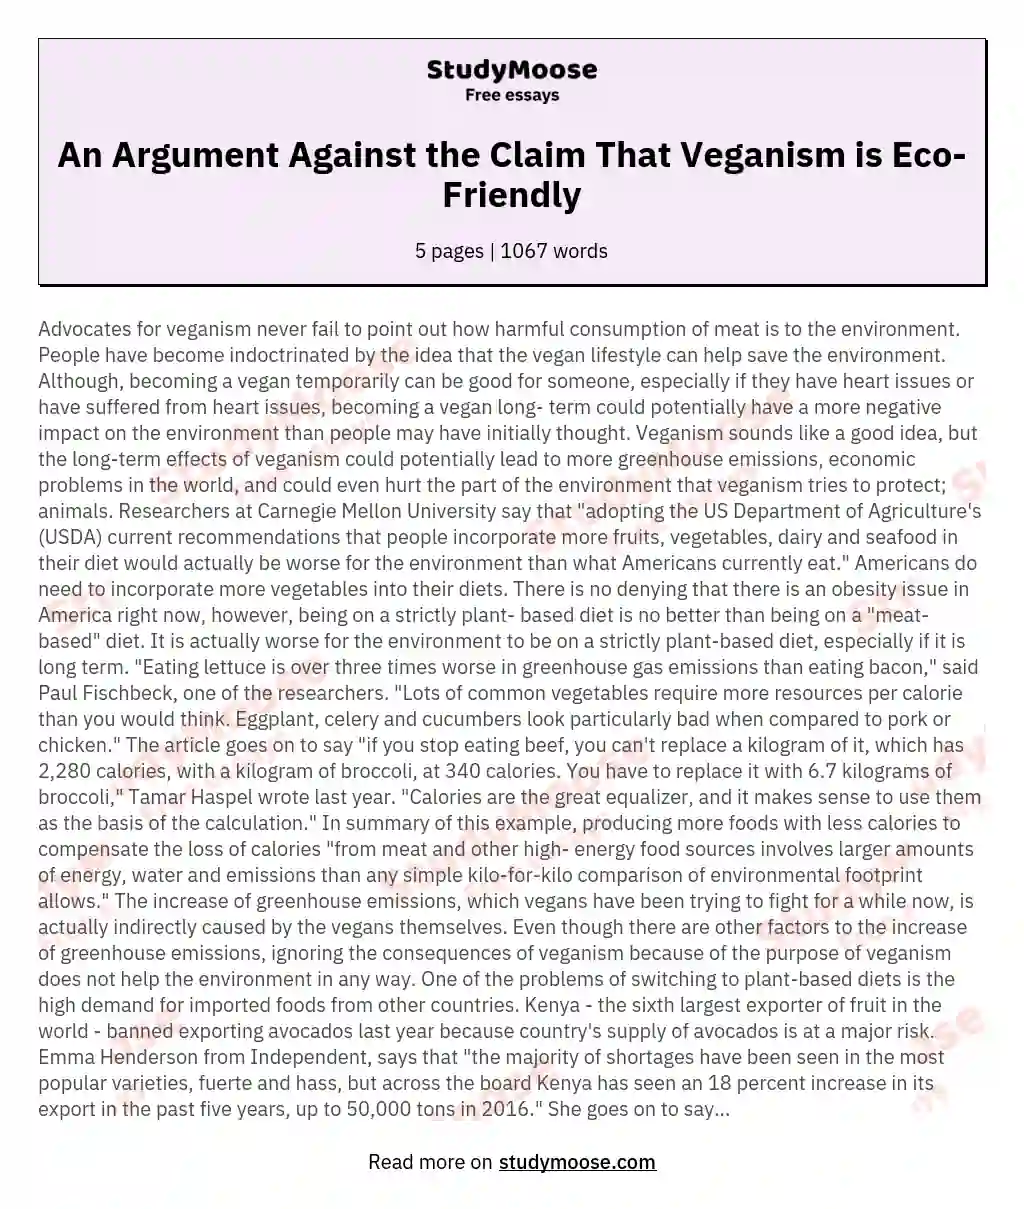 An Argument Against the Claim That Veganism is Eco-Friendly essay